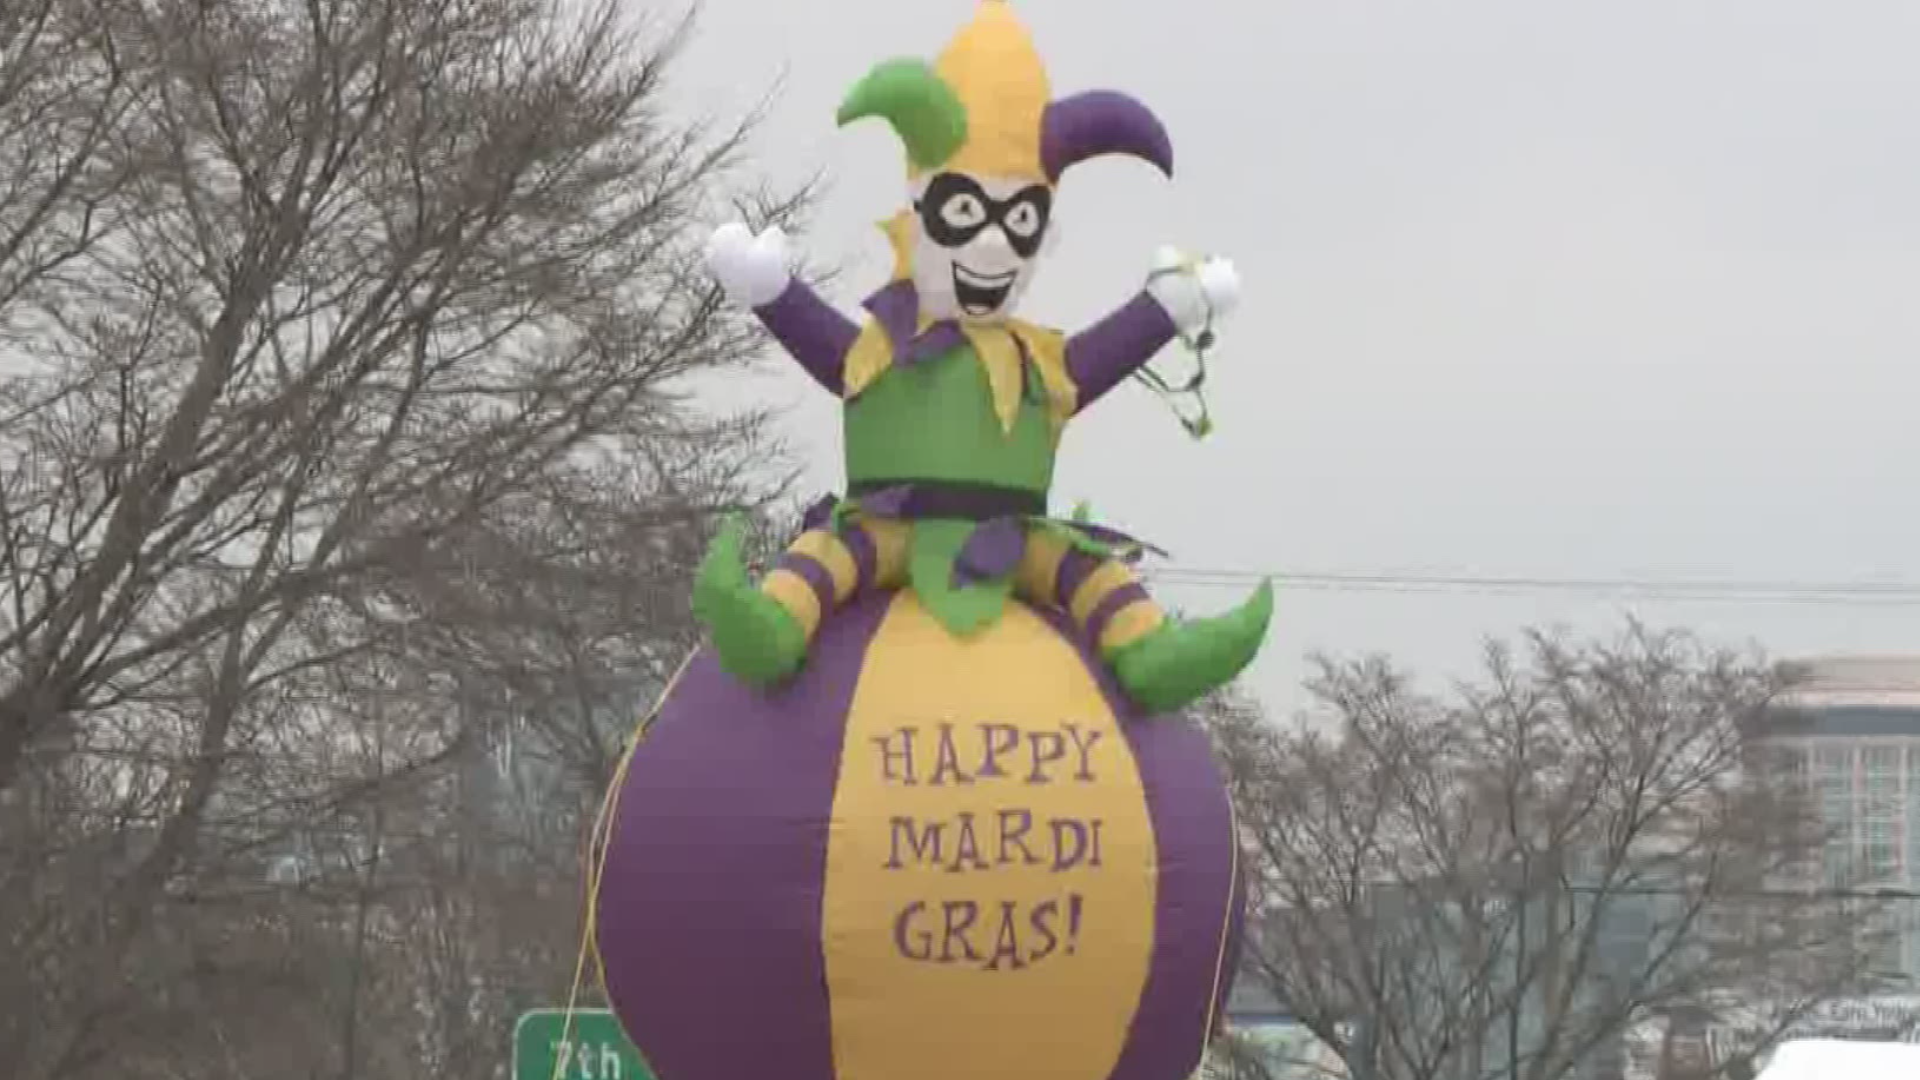 This weekend is the last weekend before Fat Tuesday, which means it's time for the annual celebration in St. Louis’ Soulard neighborhood.